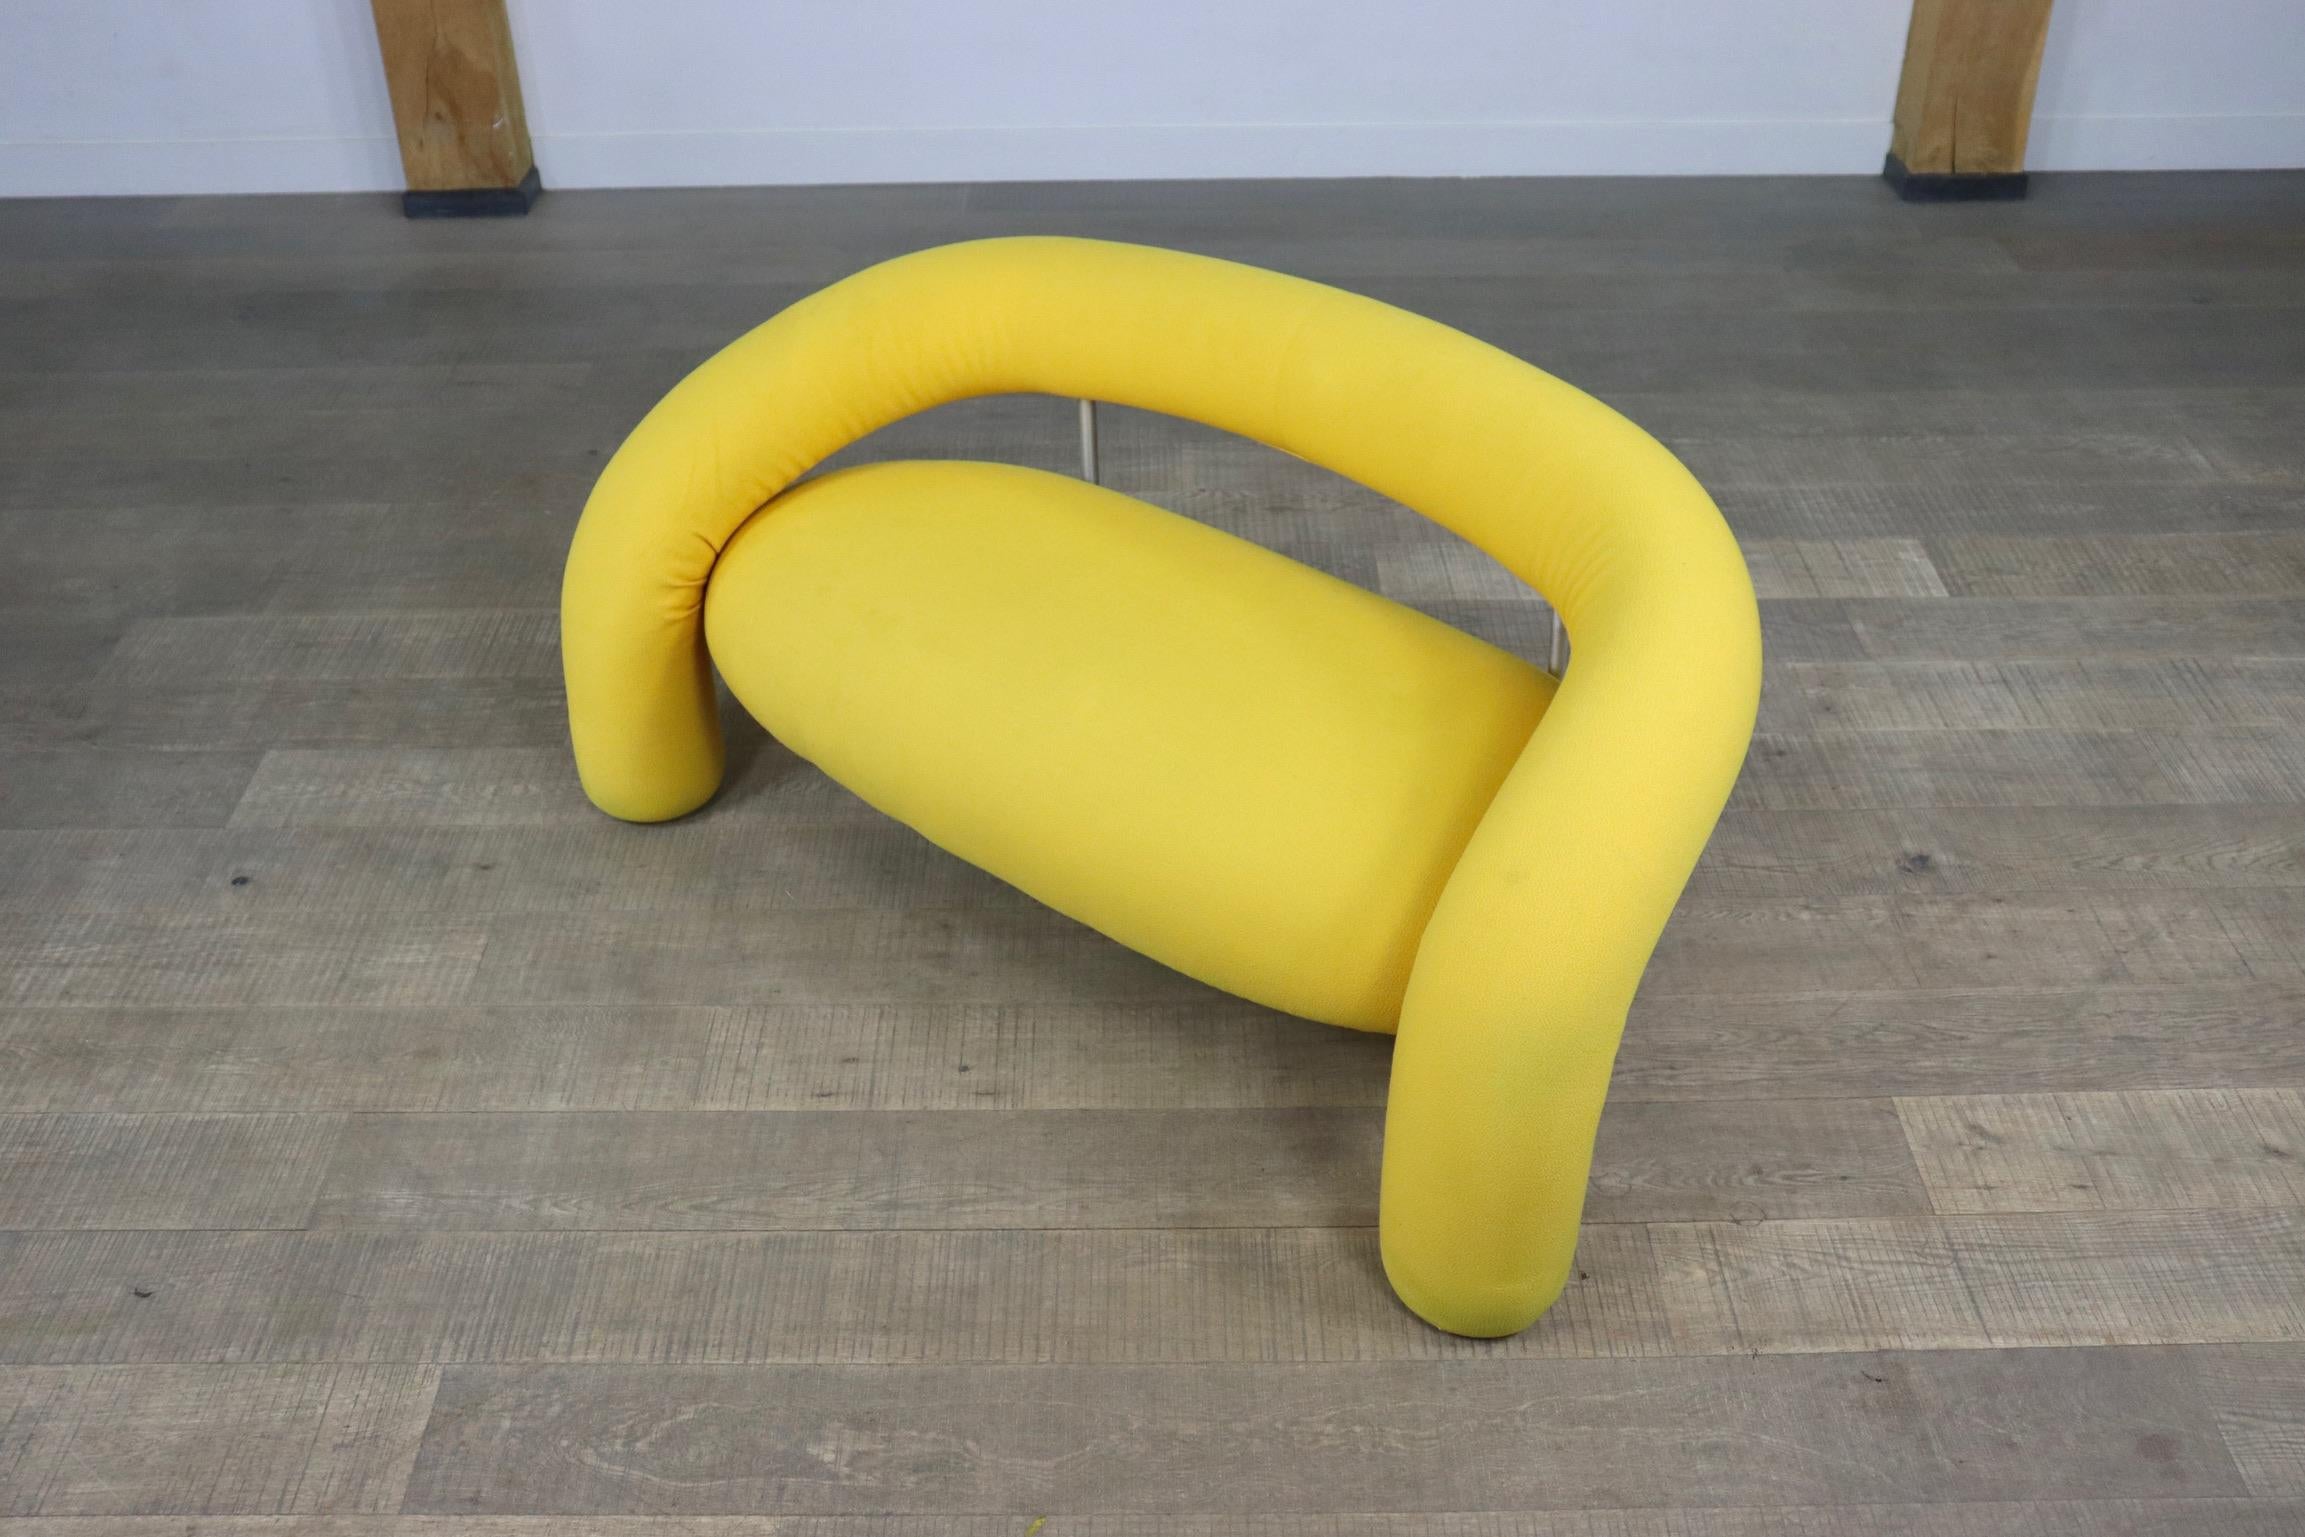 Rare sculptural postmodern designer sofa model 'Tube' designed by Anna & Carlo Bartoli for Italian high-end furniture manufacturer Rossi di Albizzate. 
The sofa features internal tubular metal frame, padding in polyurethane foams covered in soft